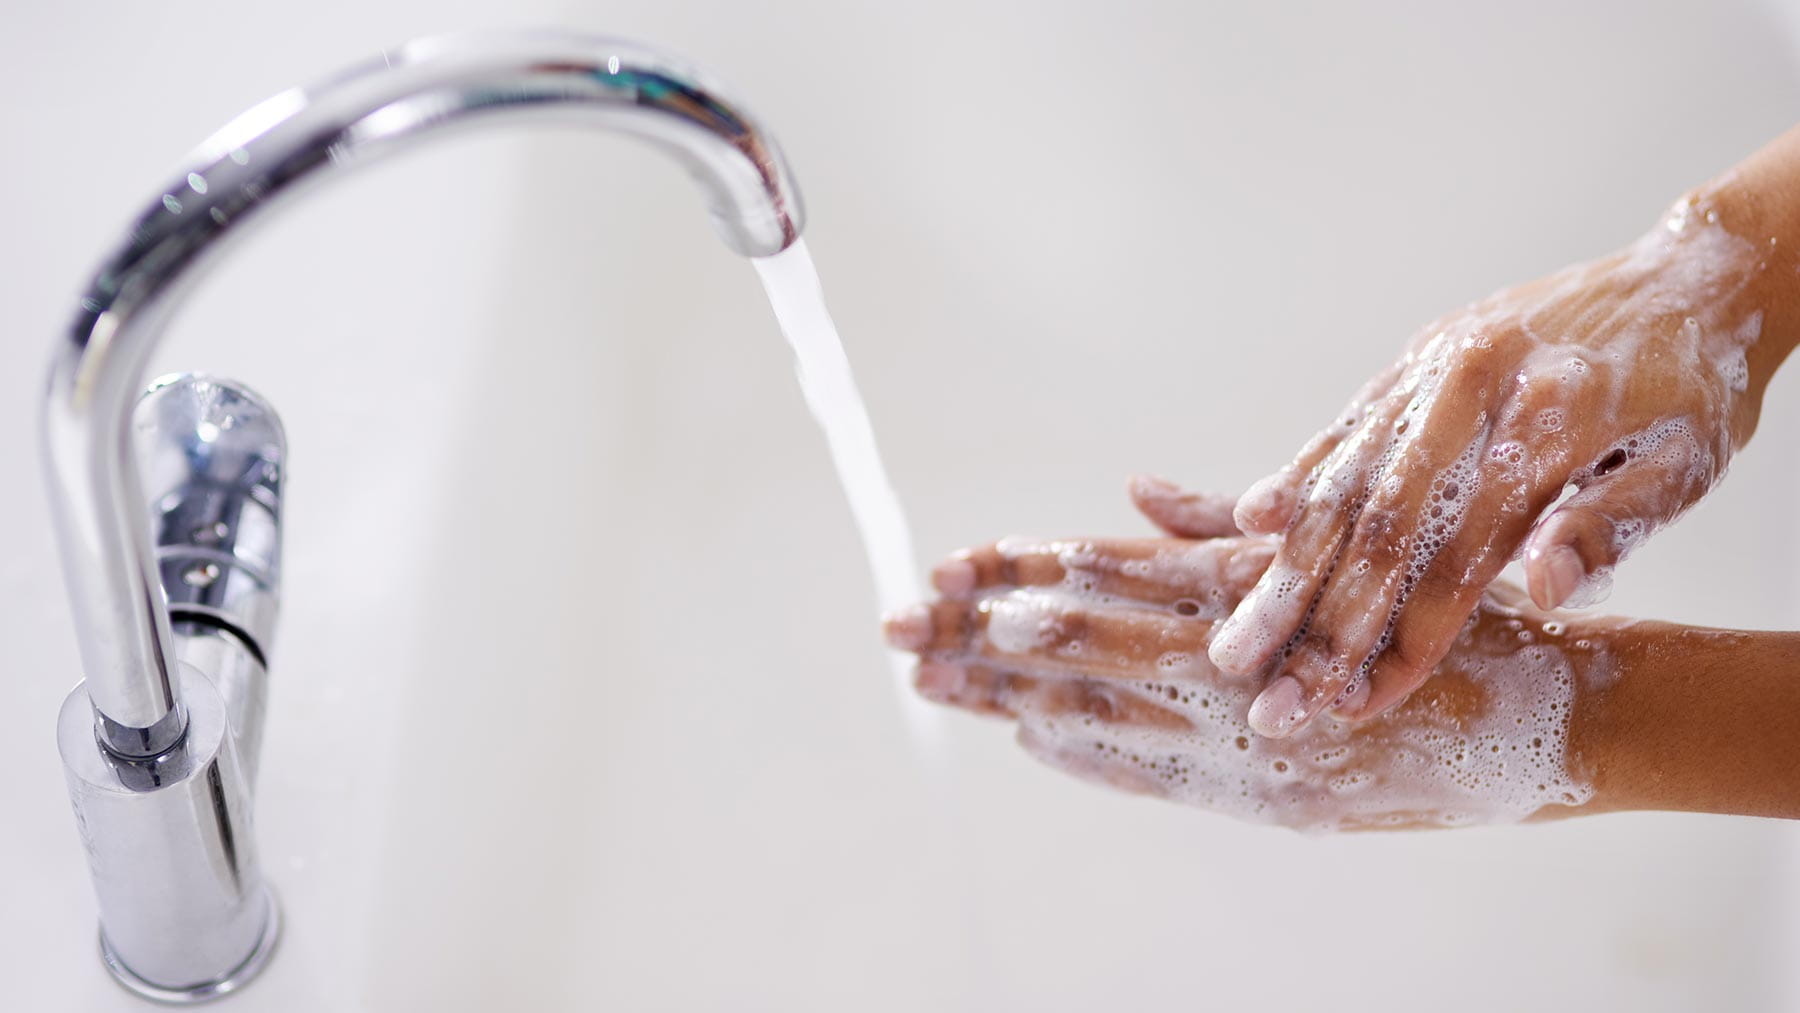 washing hands under faucet of running water